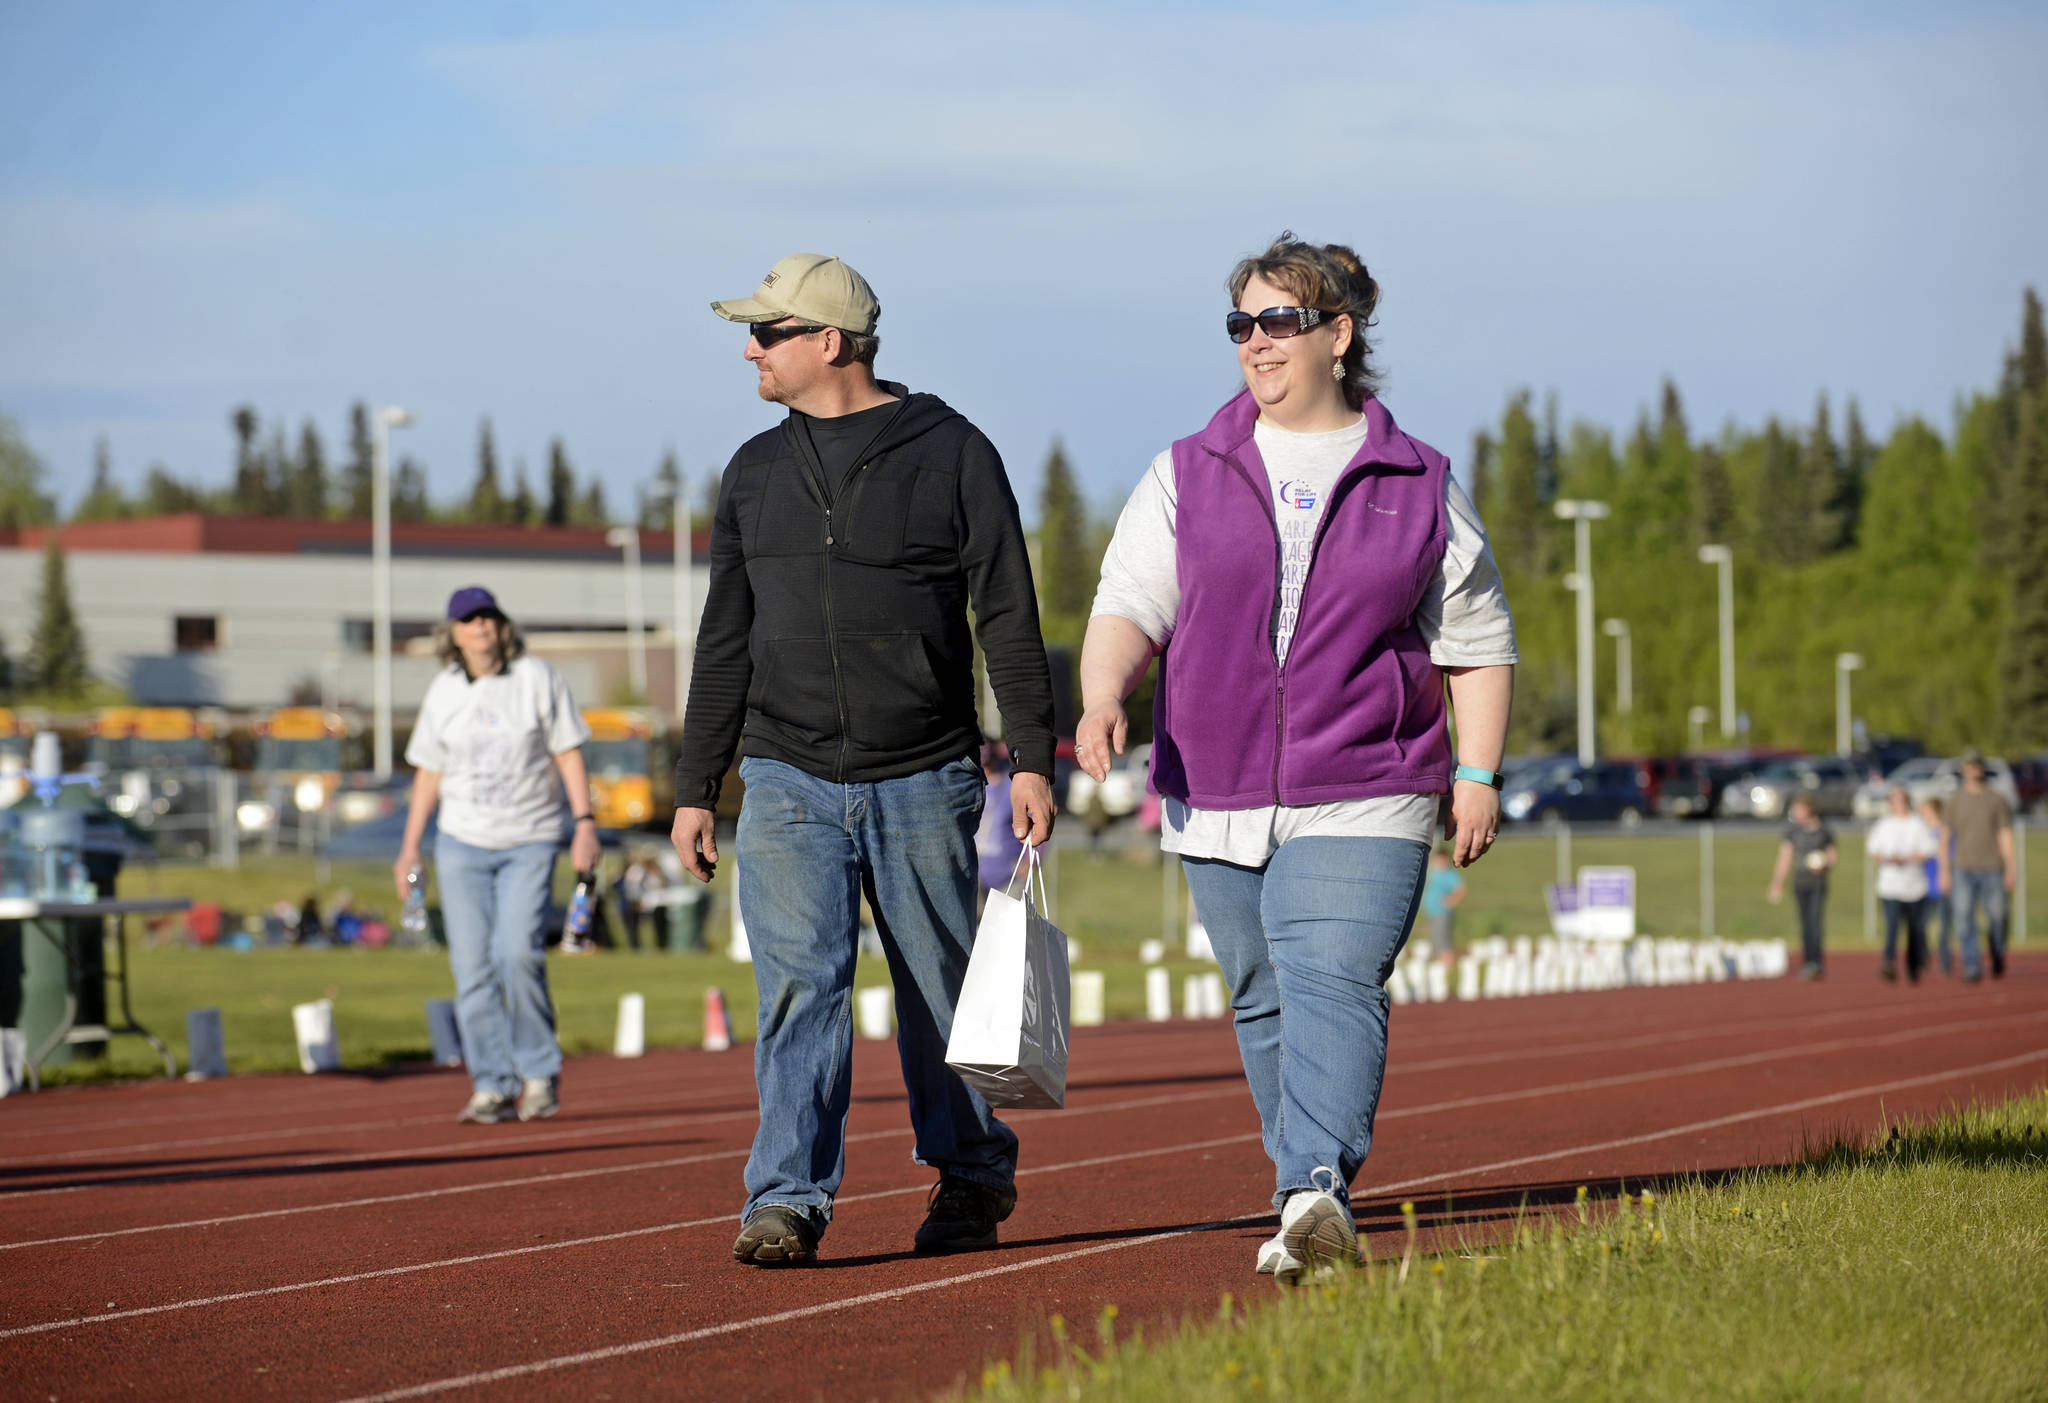 Walkers circle the track during the six-hour Relay for Life fundraiser event for the American Cancer Society on Friday, June 2, 2017 at Skyview Middle School near Soldotna, Alaska. Central peninsula Relay for Life organizer Johna Beech said that this year she began conducting various fundraising events for cancer research in January and will continue until November. (Ben Boettger/Peninsula Clarion)